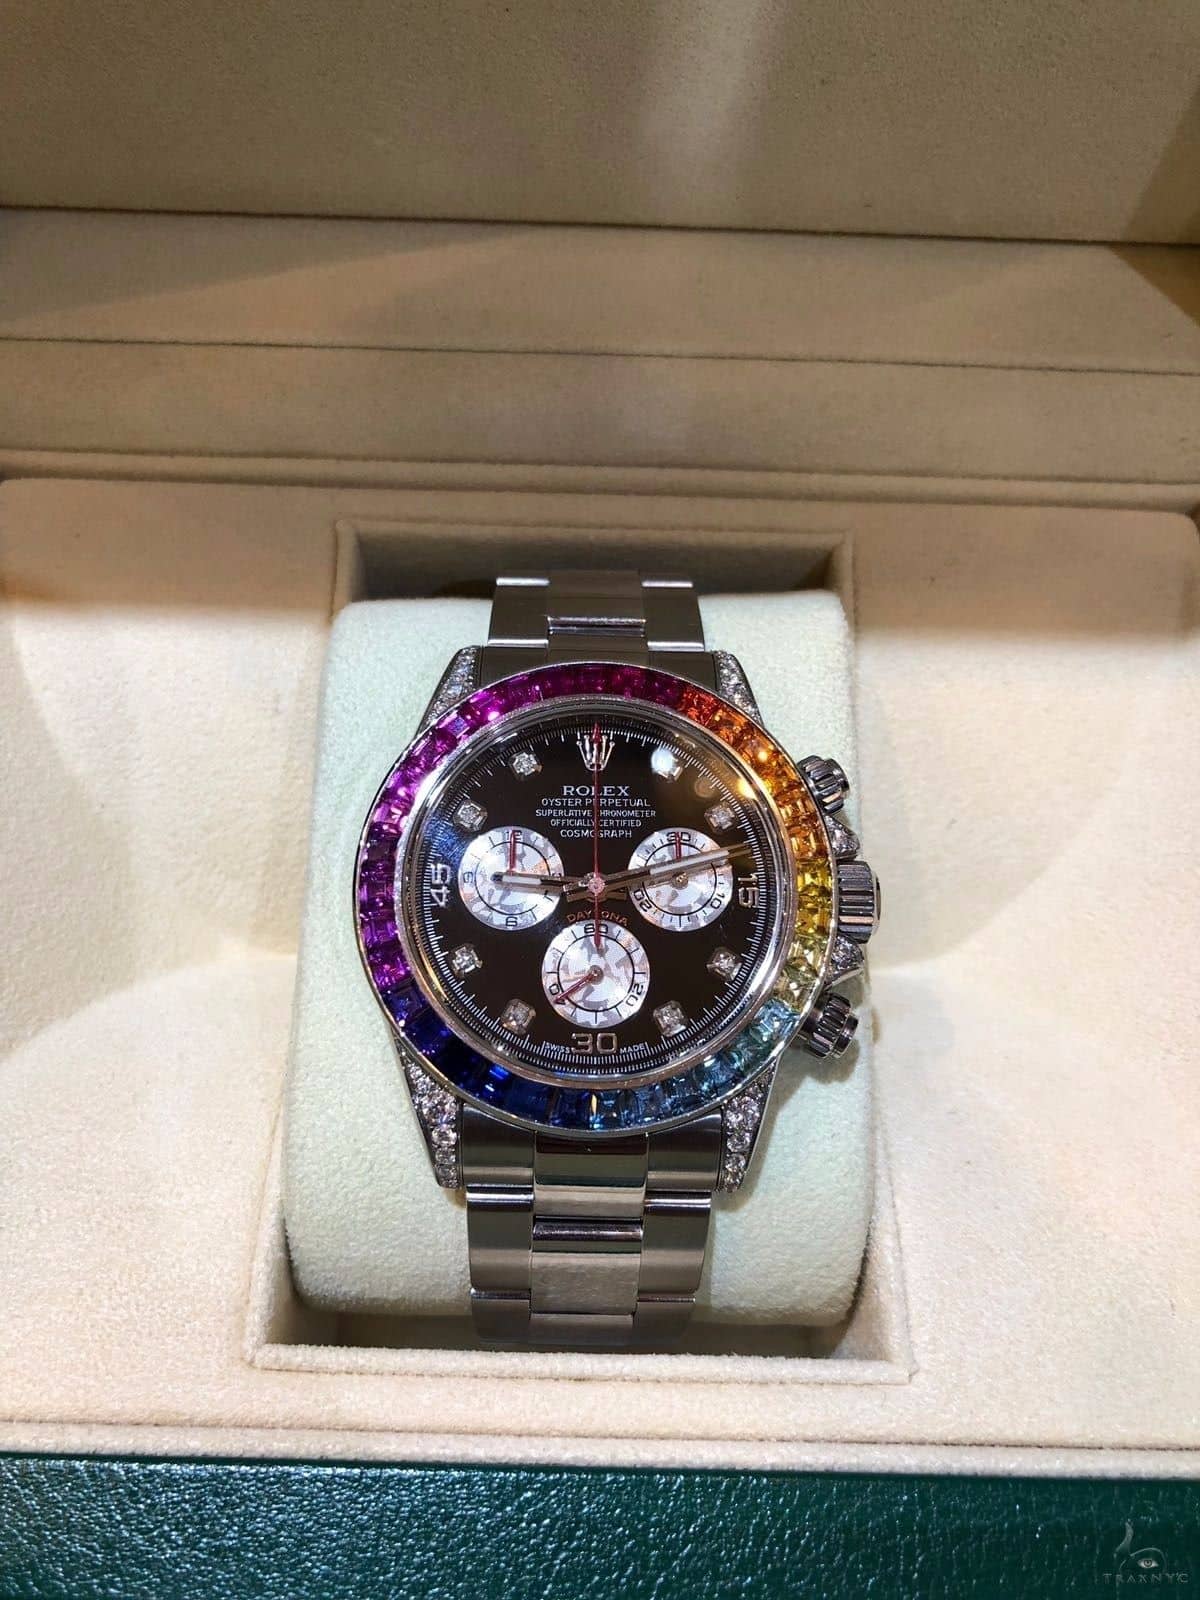 Me and Roman have 3 watches that are worth $1.5 million together. Can ... |  TikTok